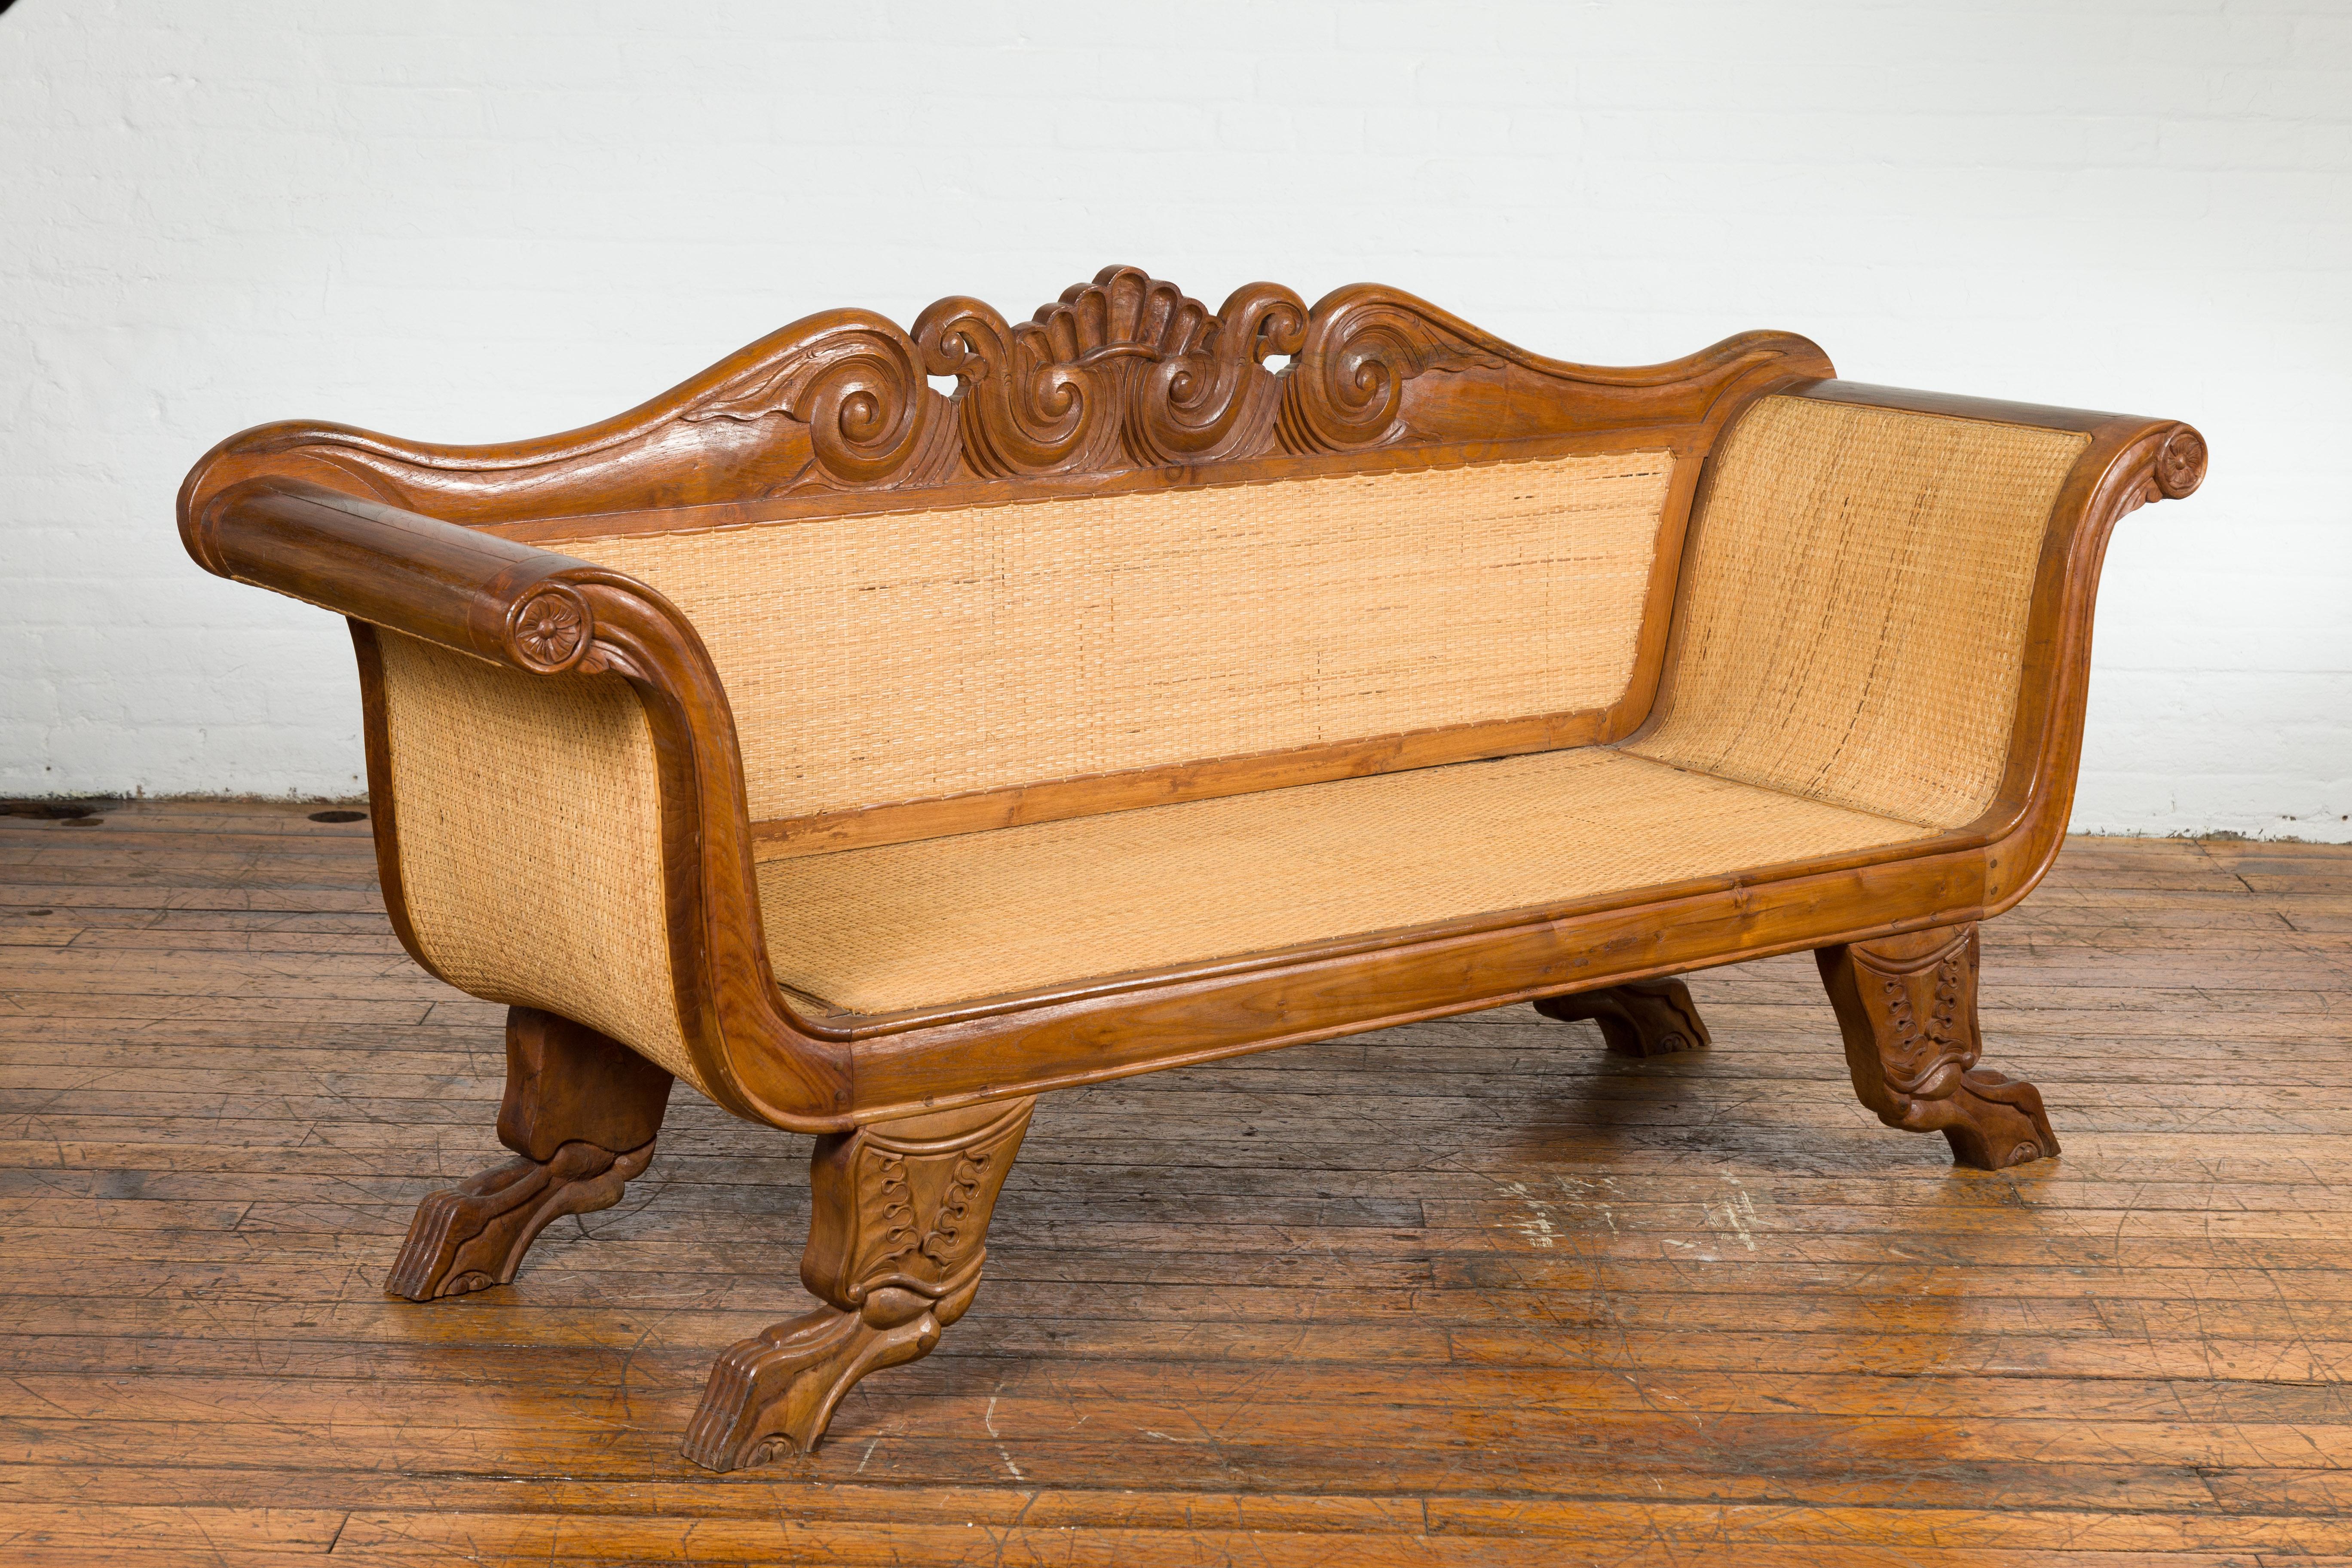 Dutch Colonial Javanese Teak Settee with Carved Décor and Inset Woven Rattan For Sale 10